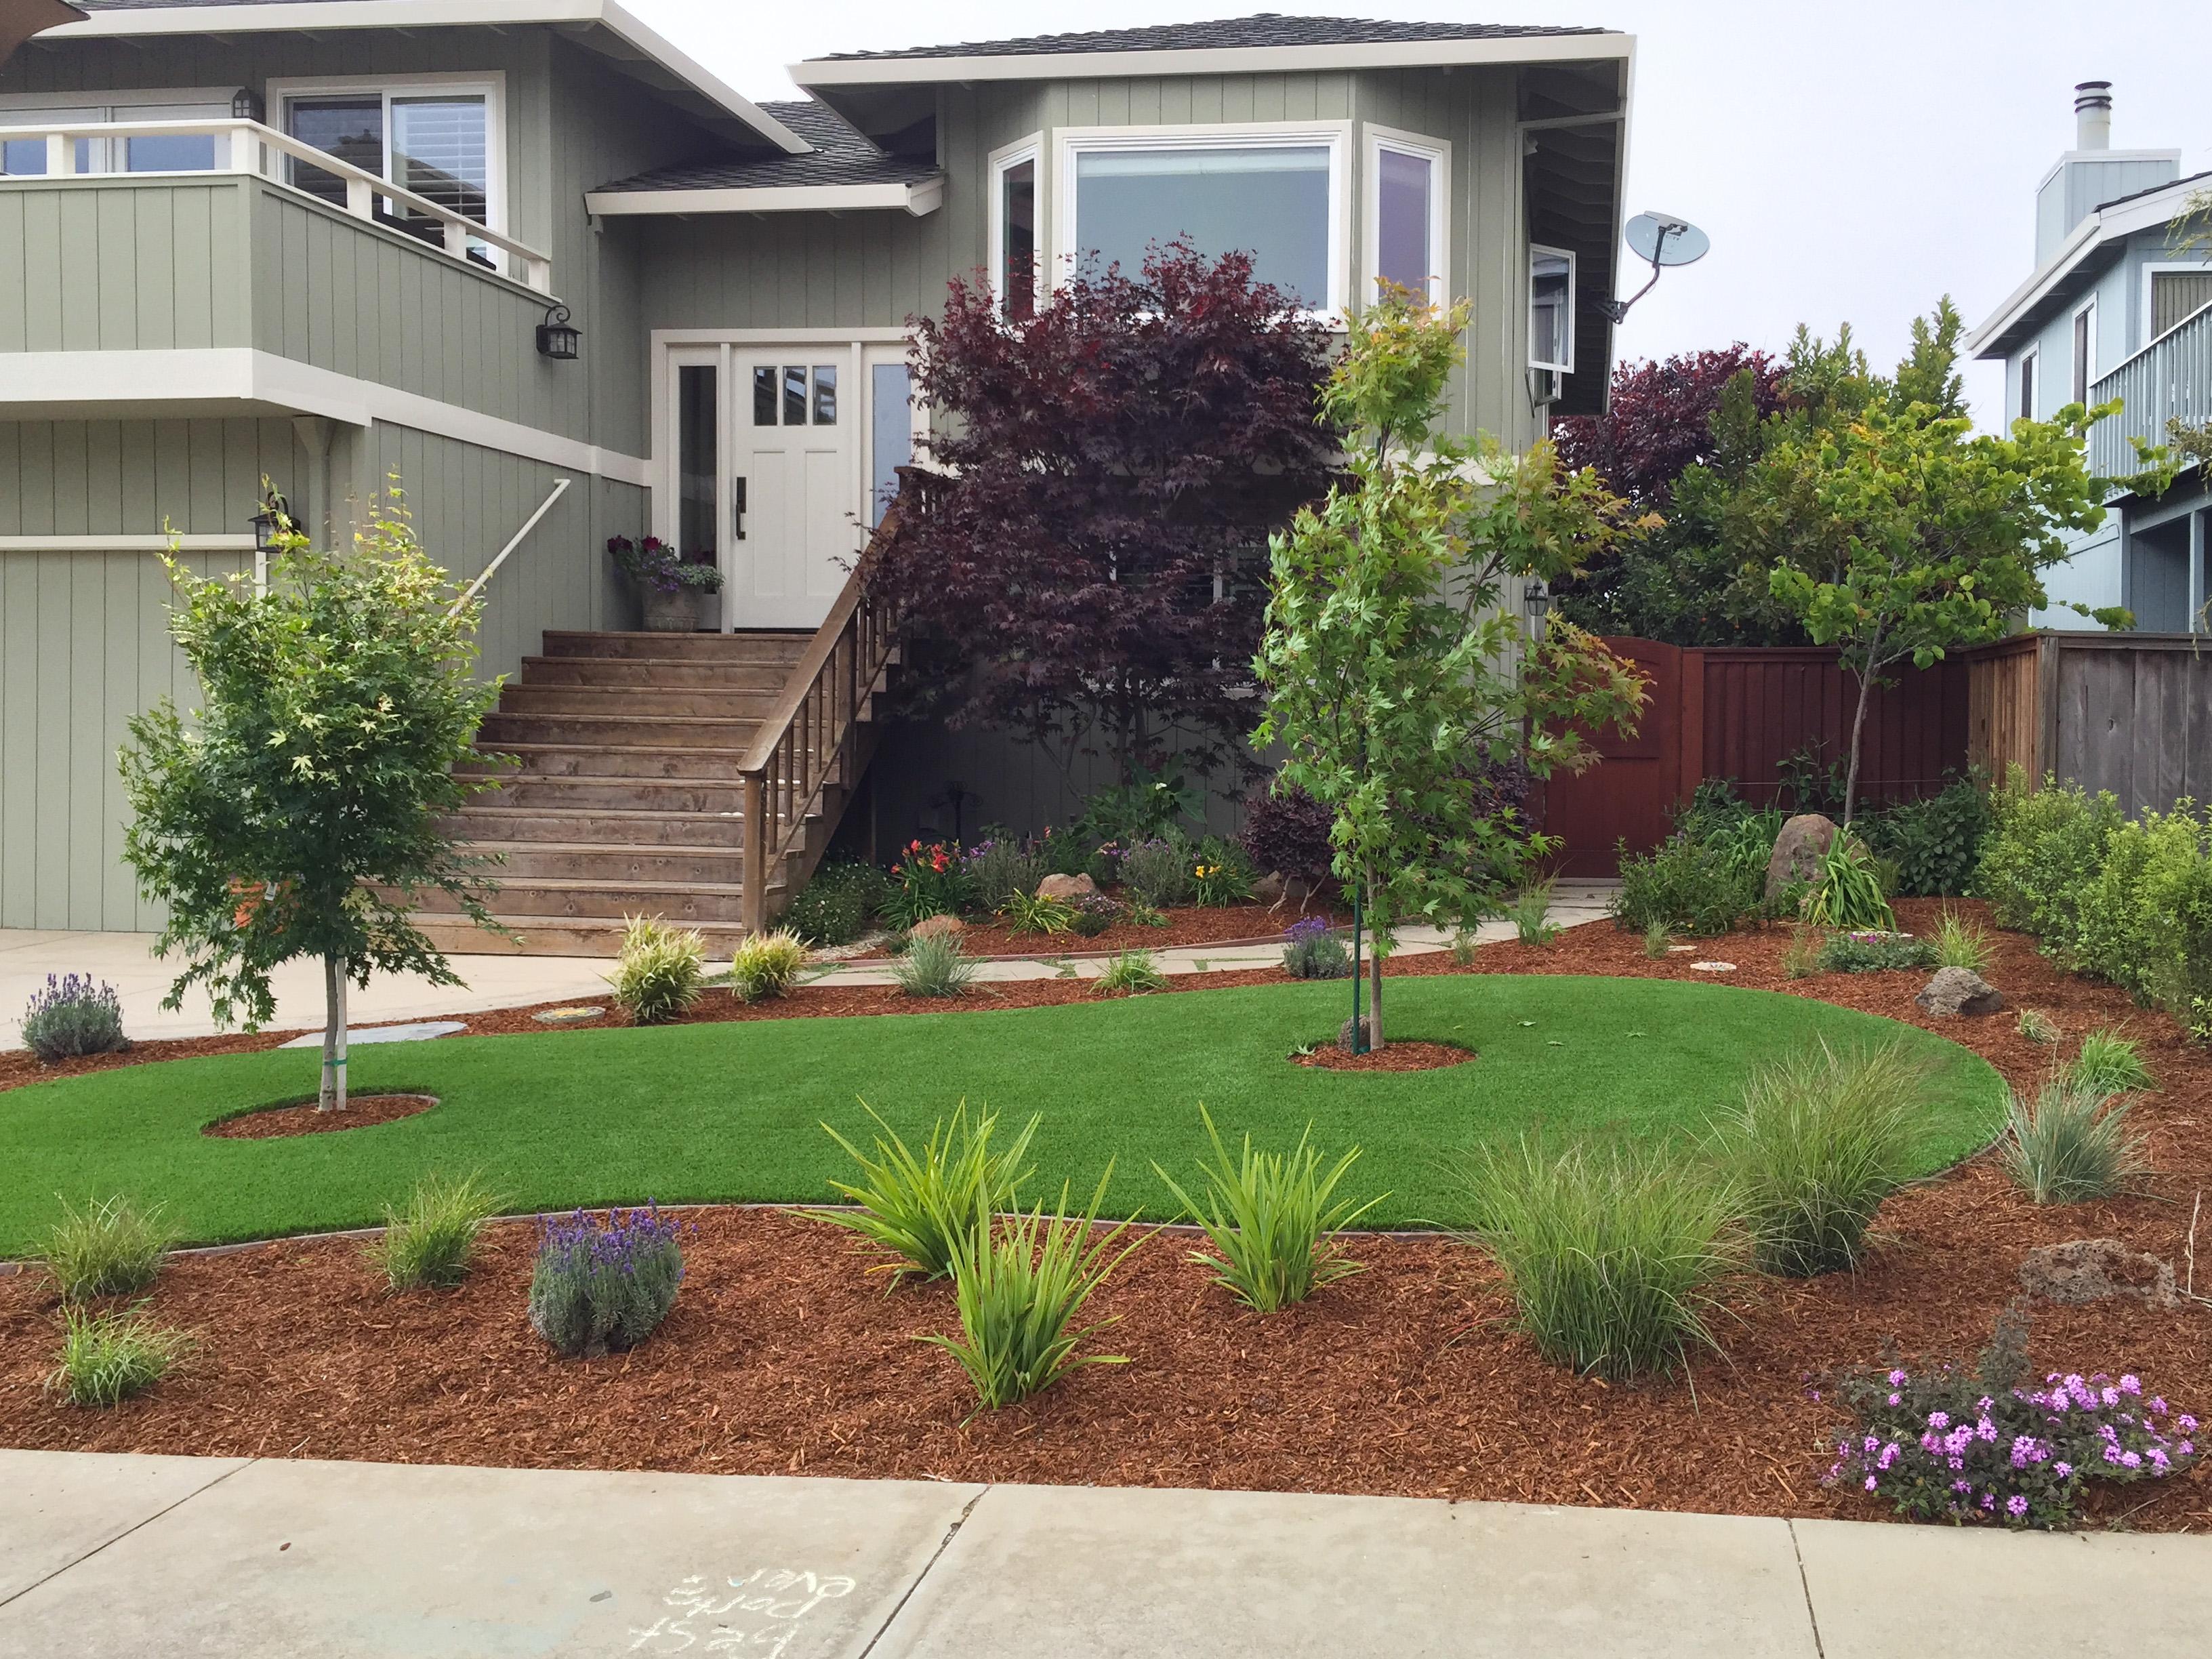 Picture of Pacific Landscaping & Tree Service Inc. - Pacific Landscaping & Tree Service Inc.